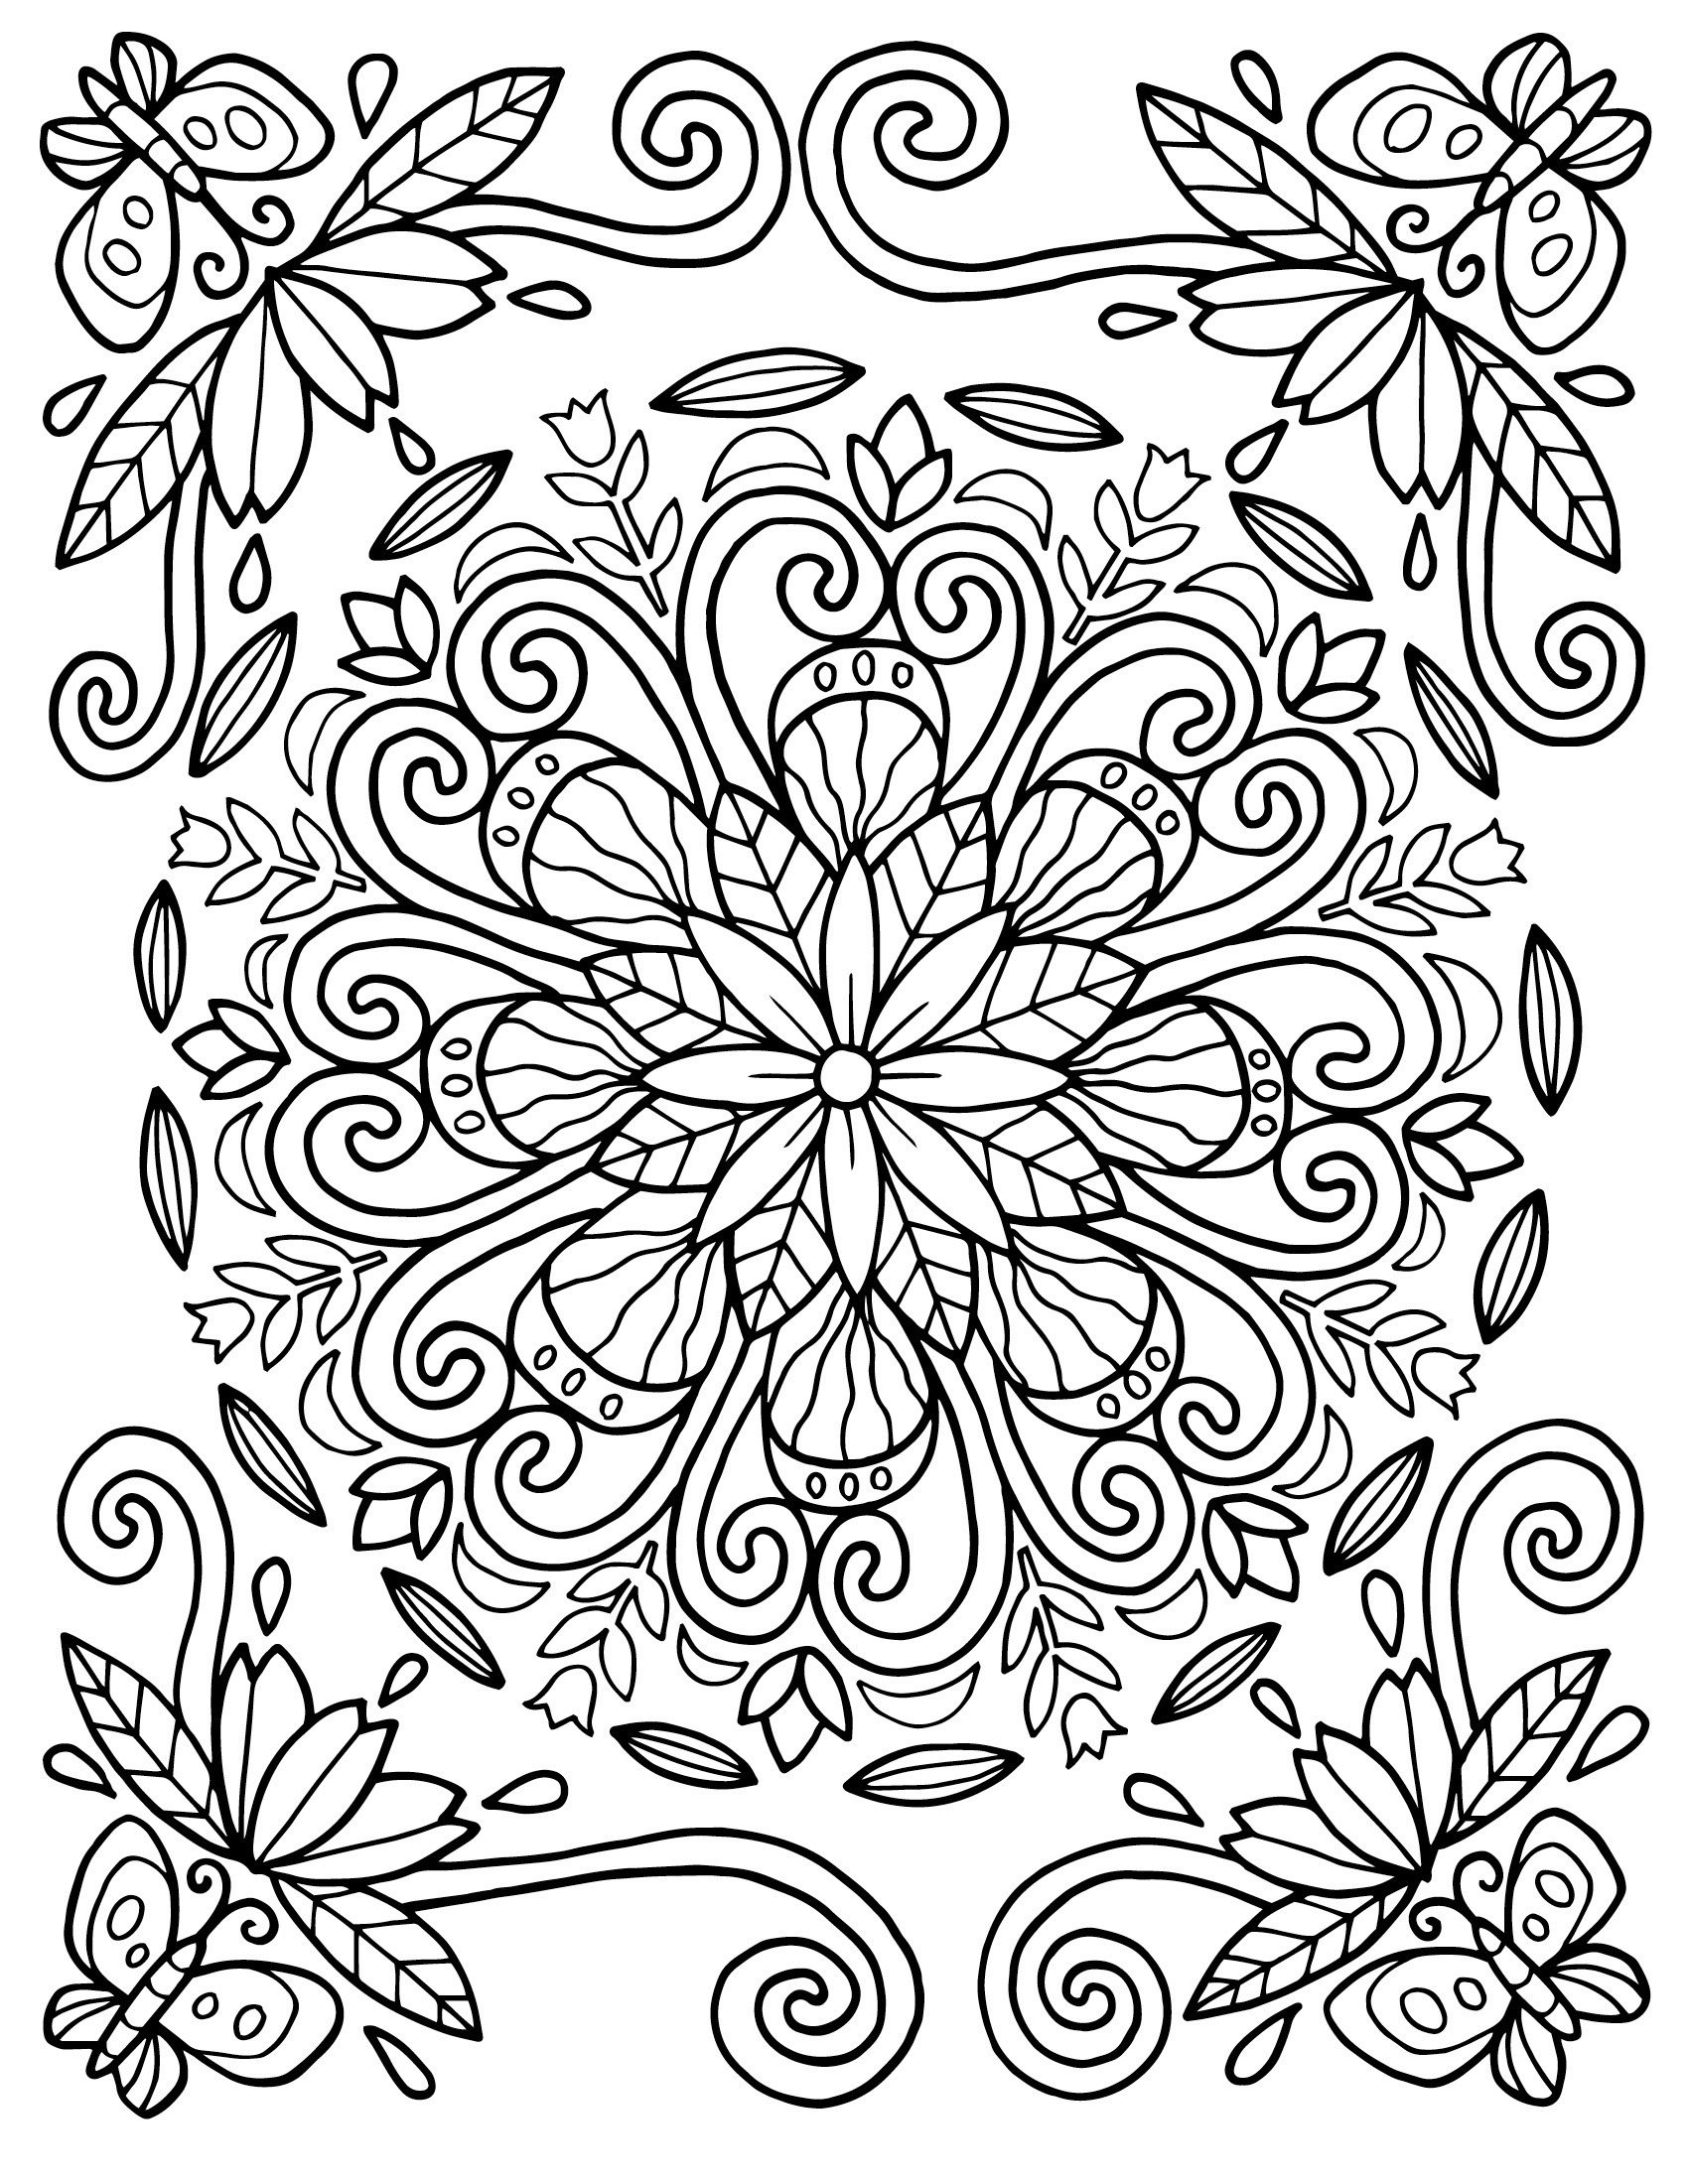 Floral coloring pages for adults